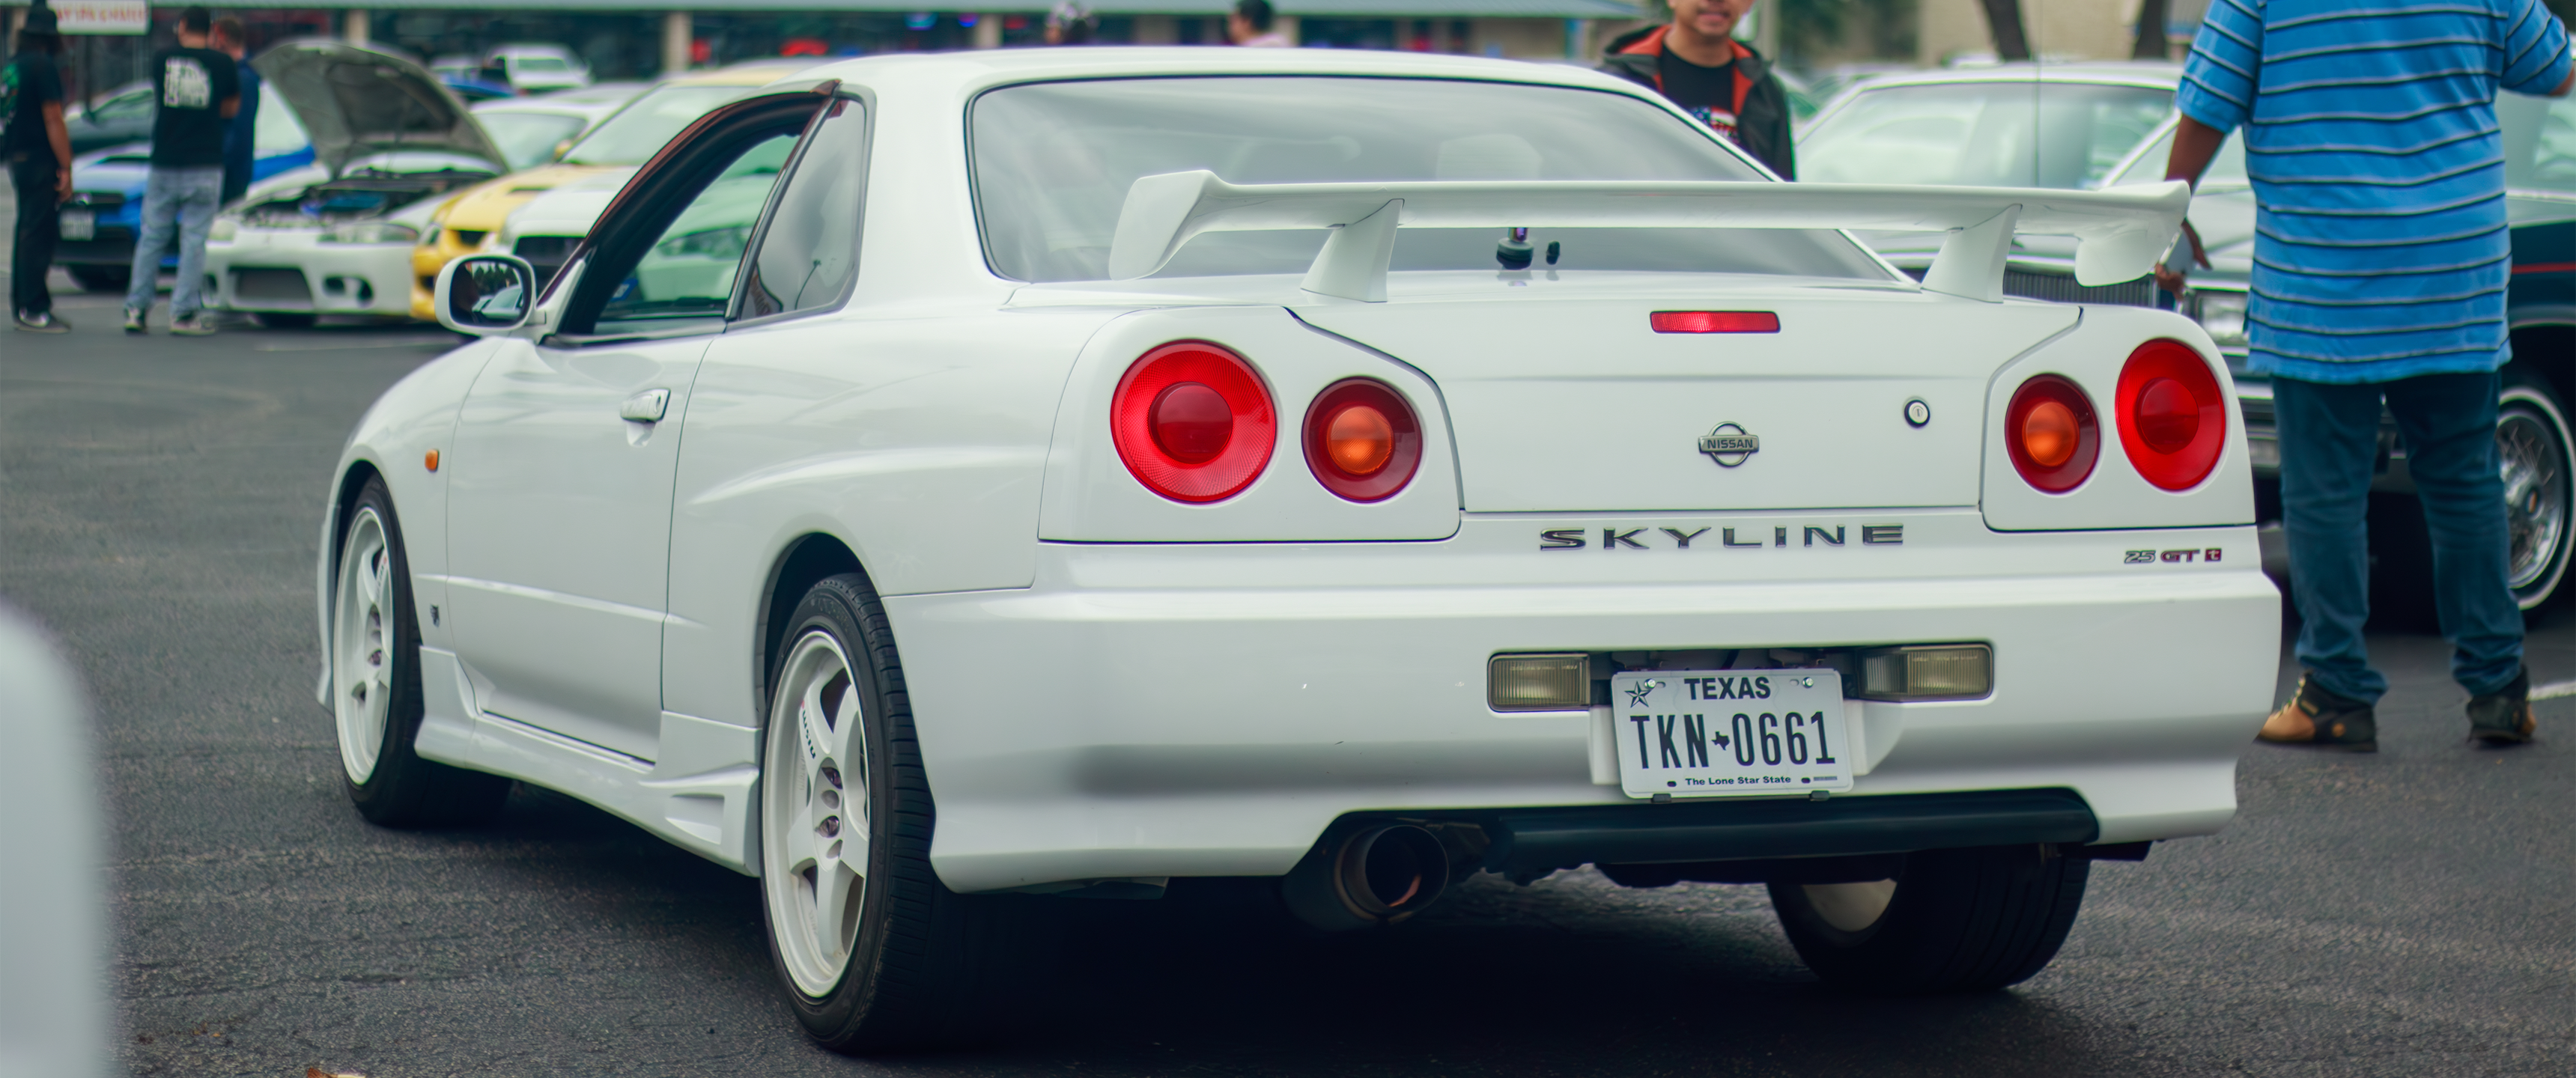 General 3440x1440 car Nissan Skyline R34 Nissan Skyline rear view licence plates vehicle people white cars